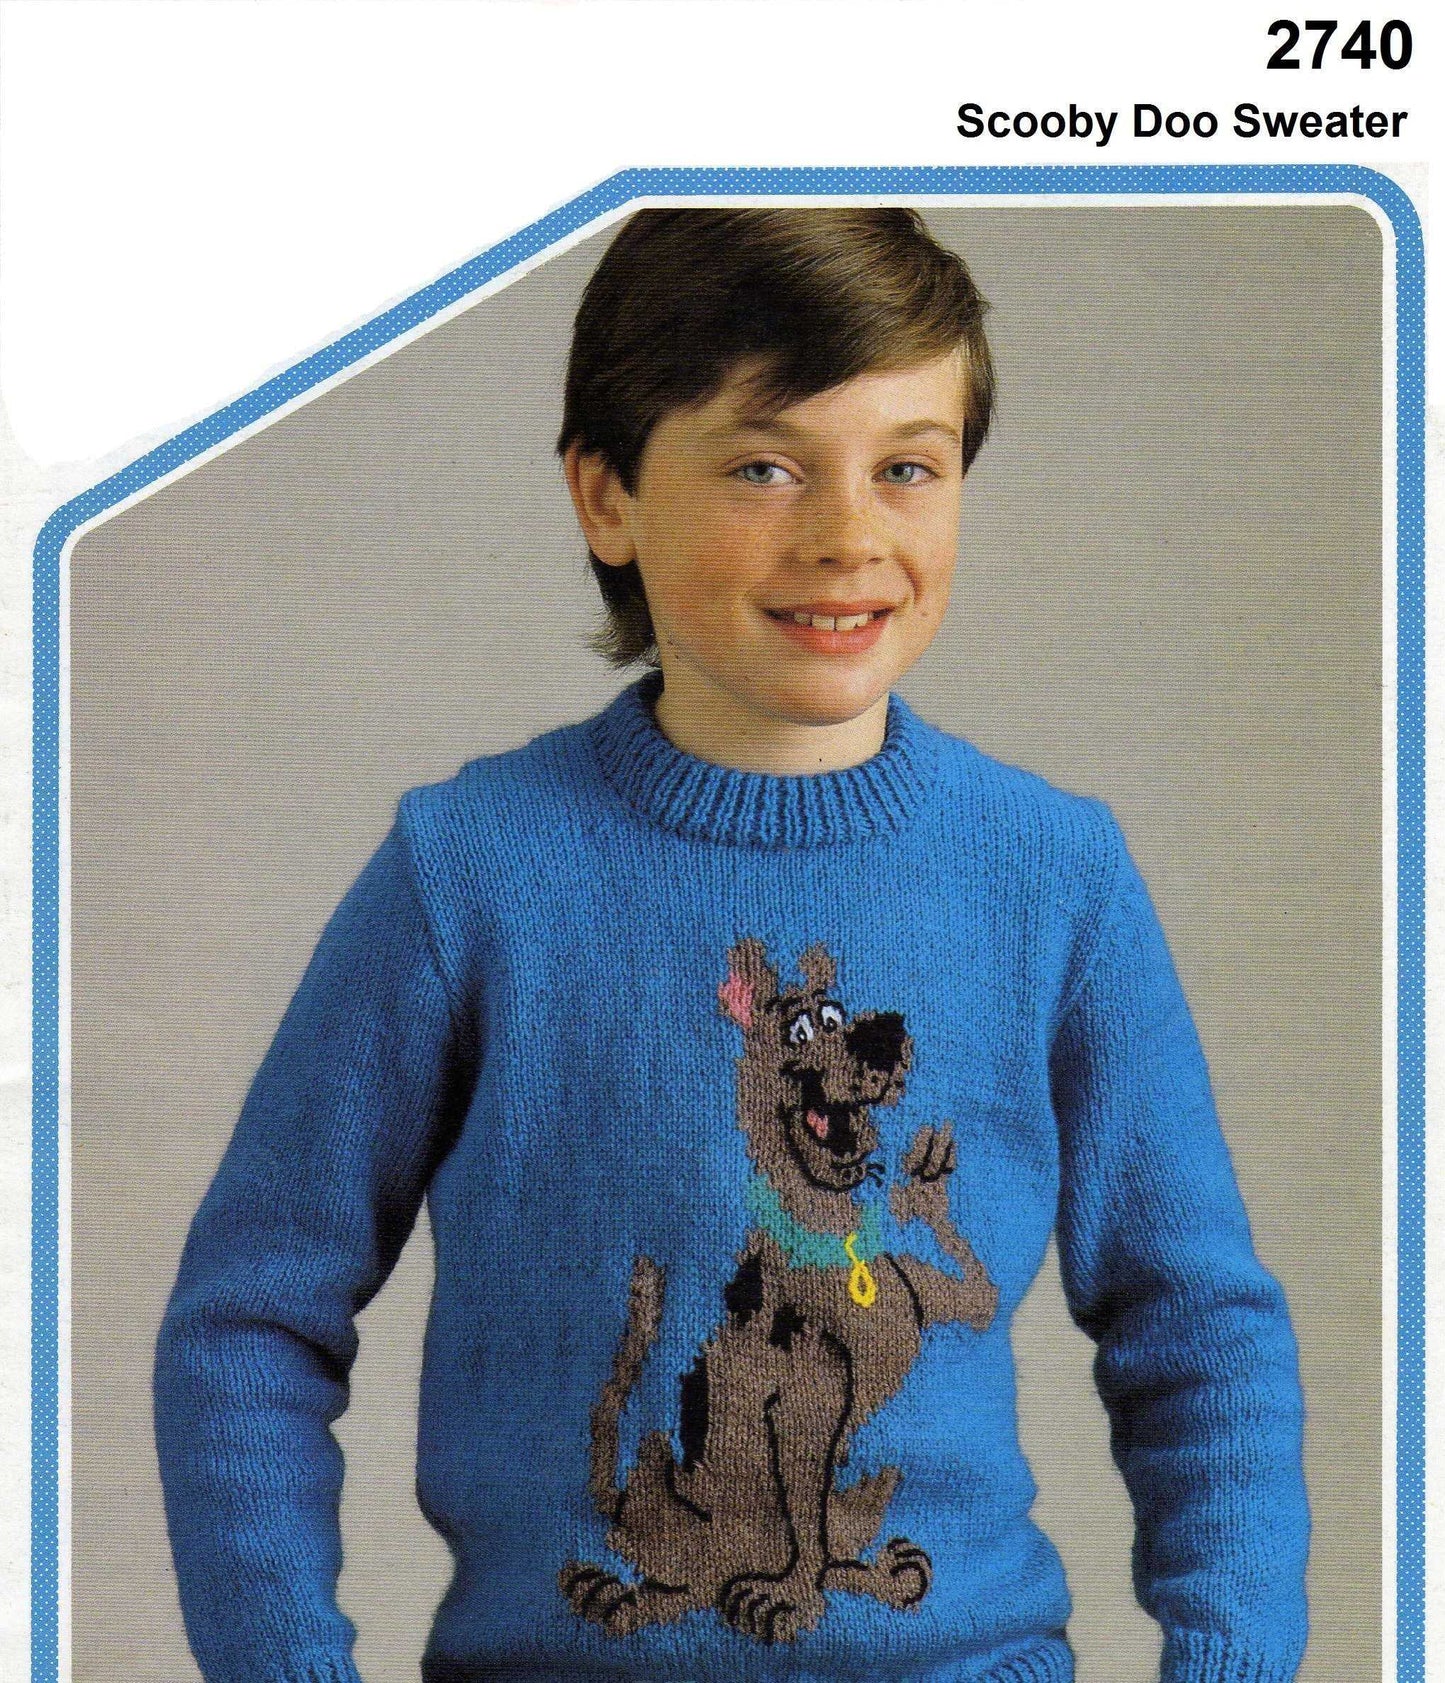  Scooby Doo Jumper Knitting Pattern by Cross Stitch Chart Heaven sold by Free Spirit Accessories